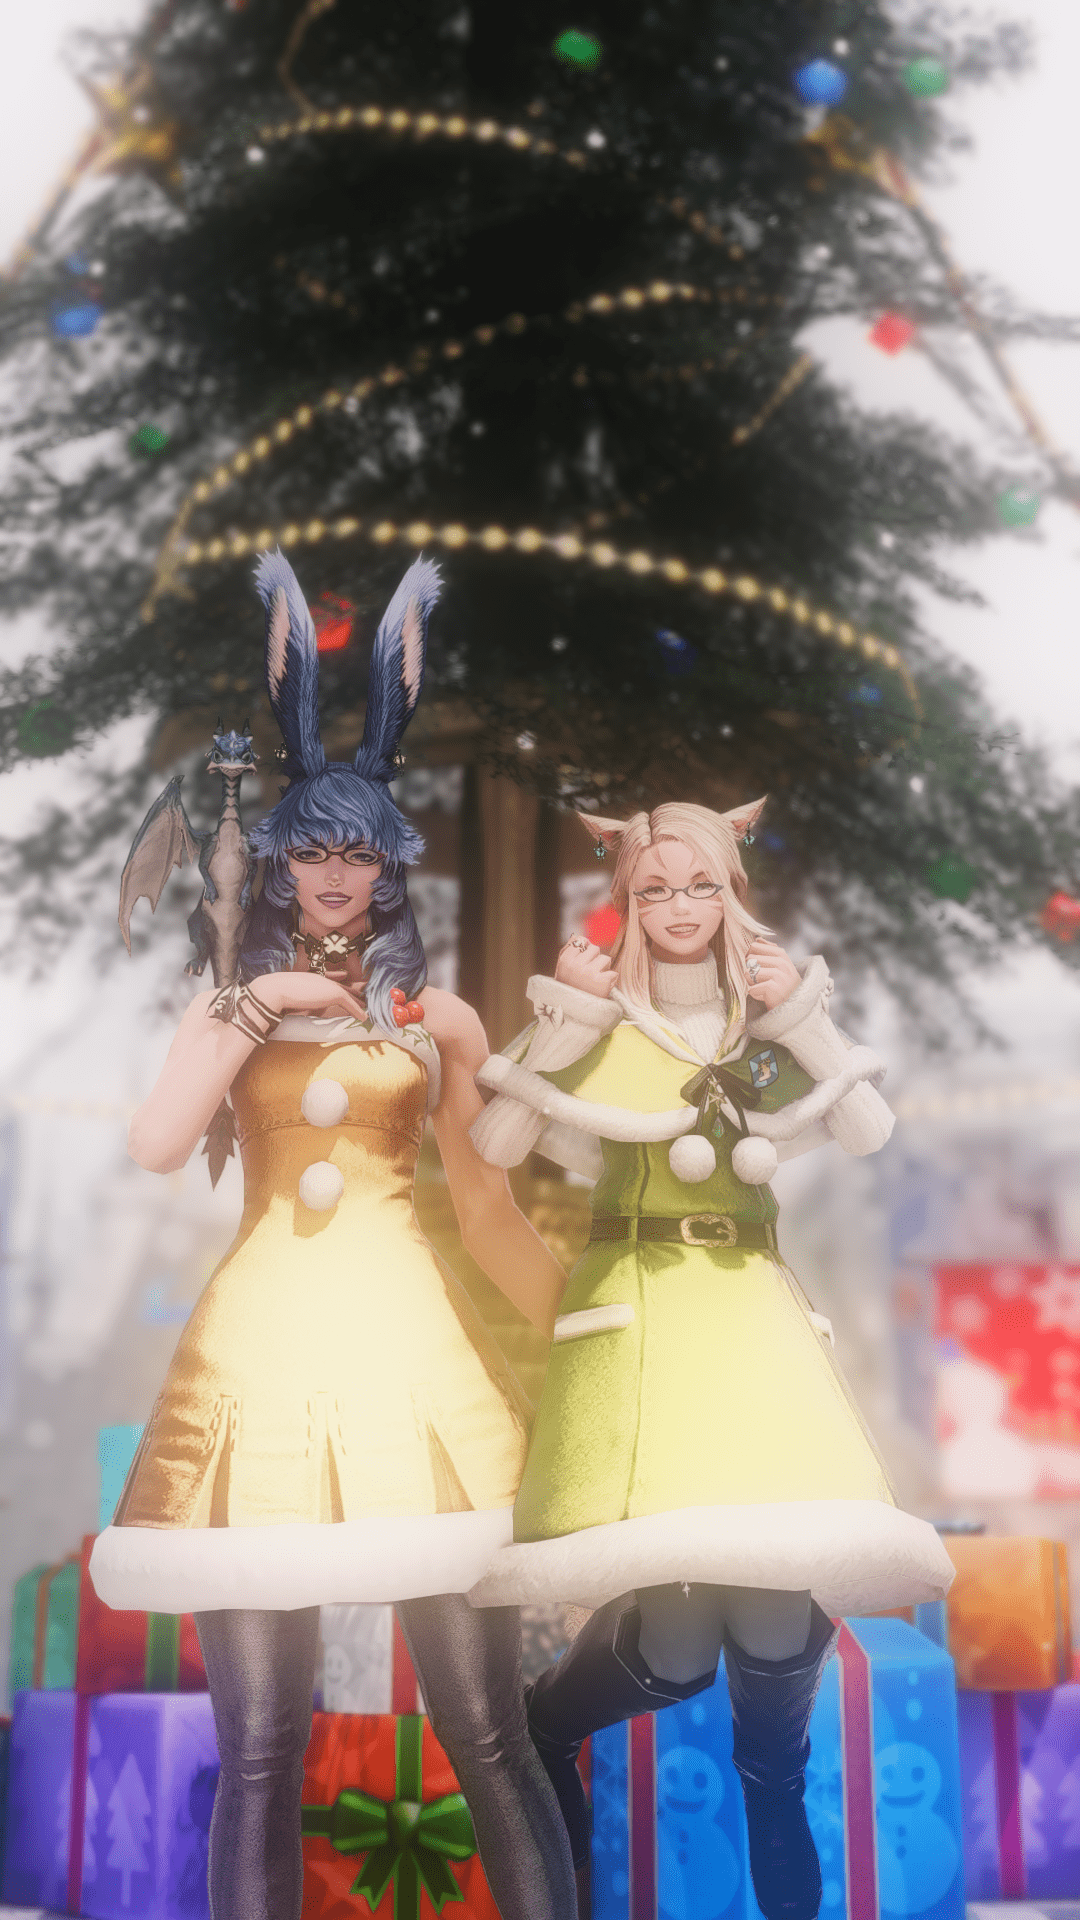 Aikirees and I donning holiday outfits in front of a holiday tree with presents below it.